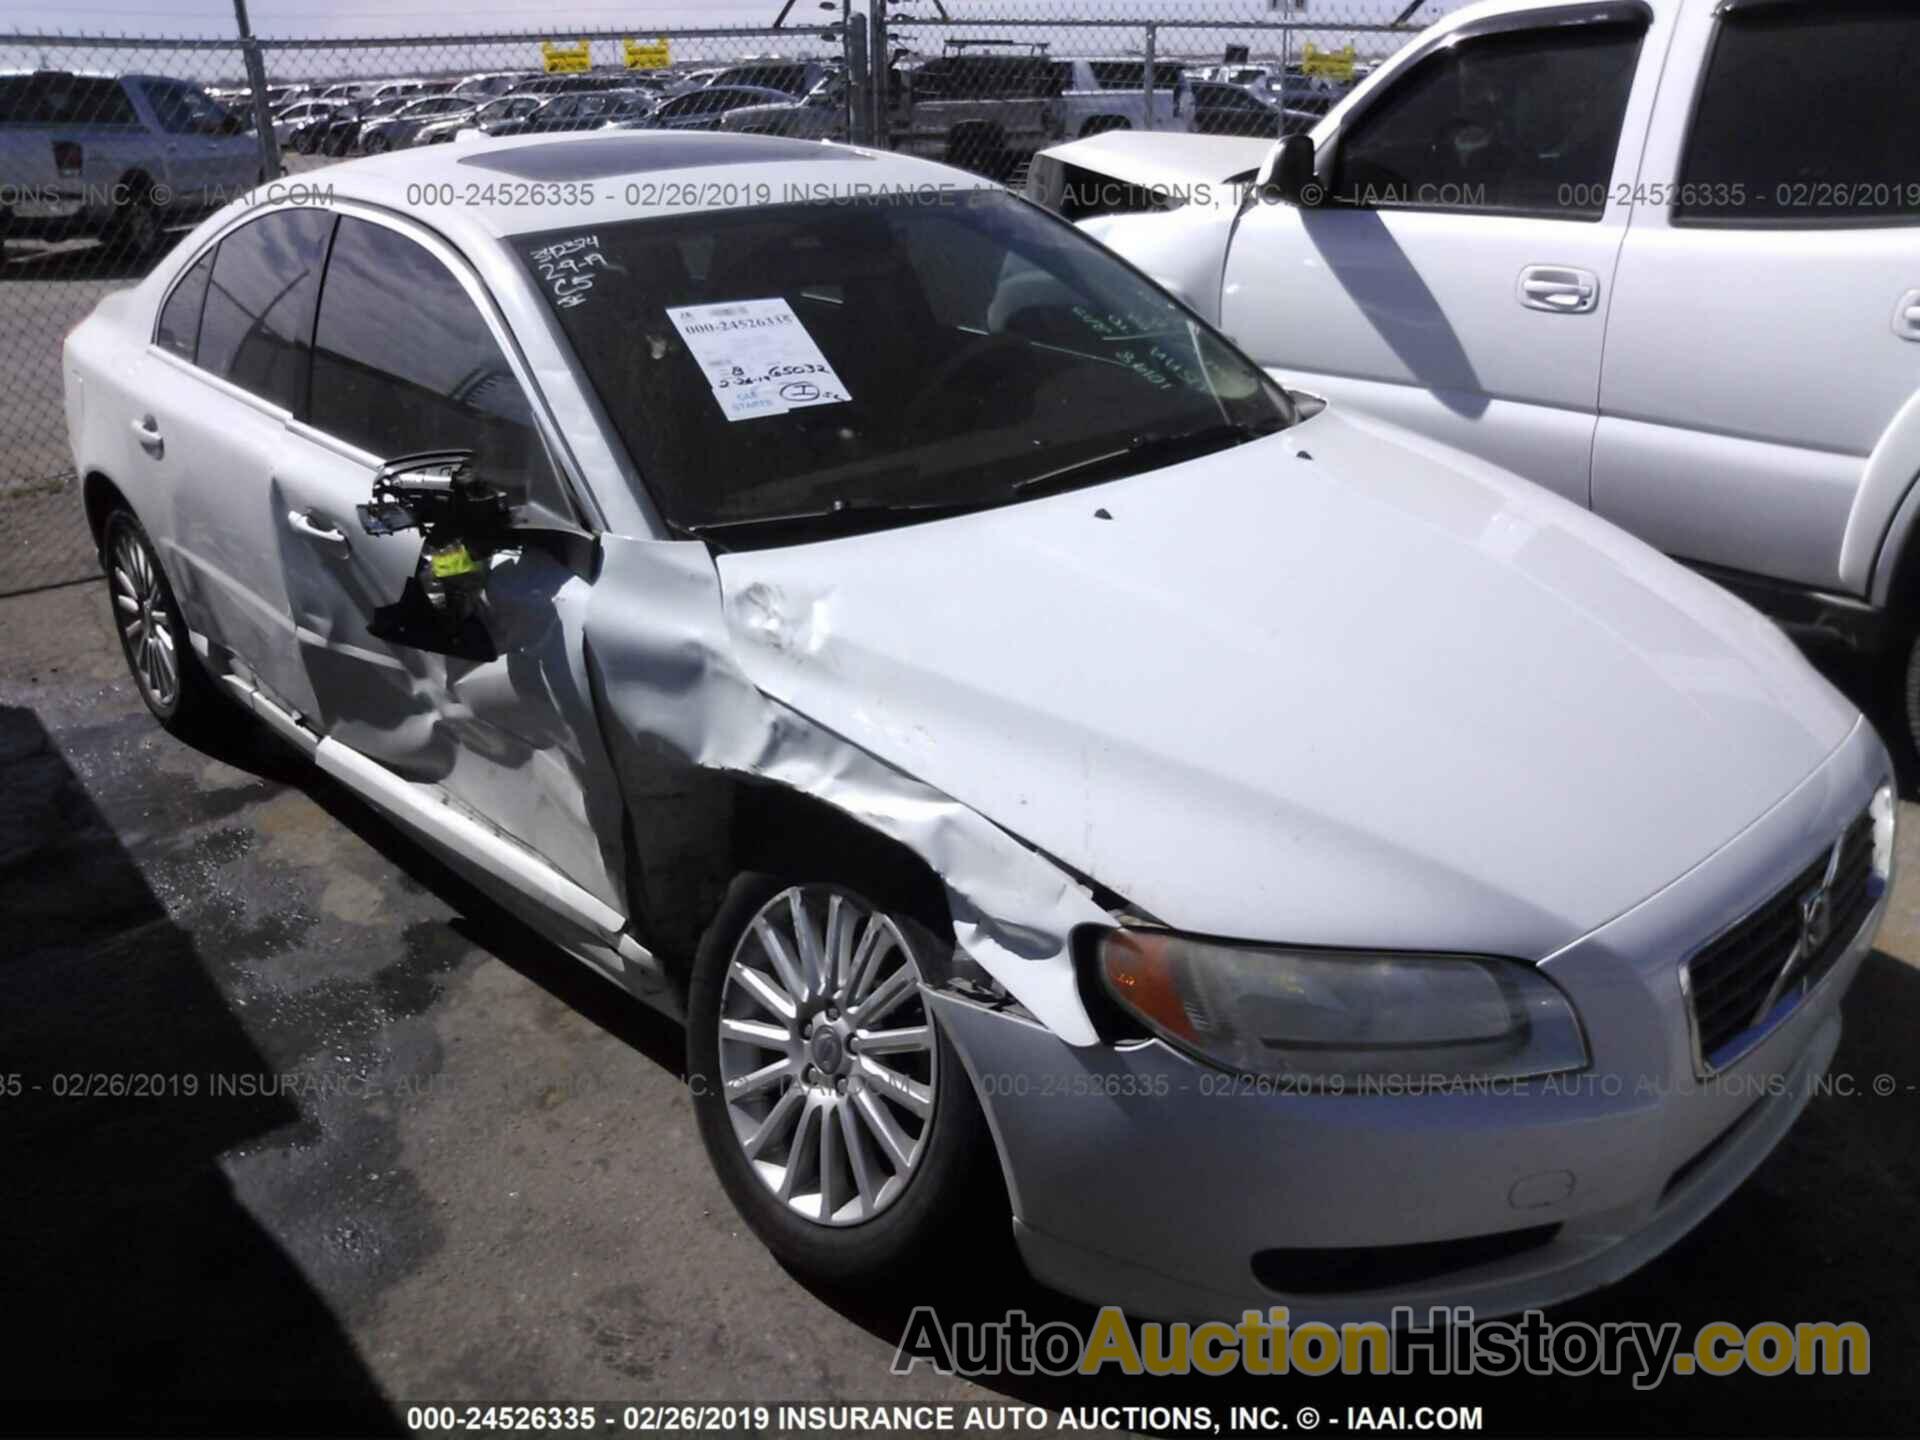 VOLVO S80 3.2, YV1AS982681057103